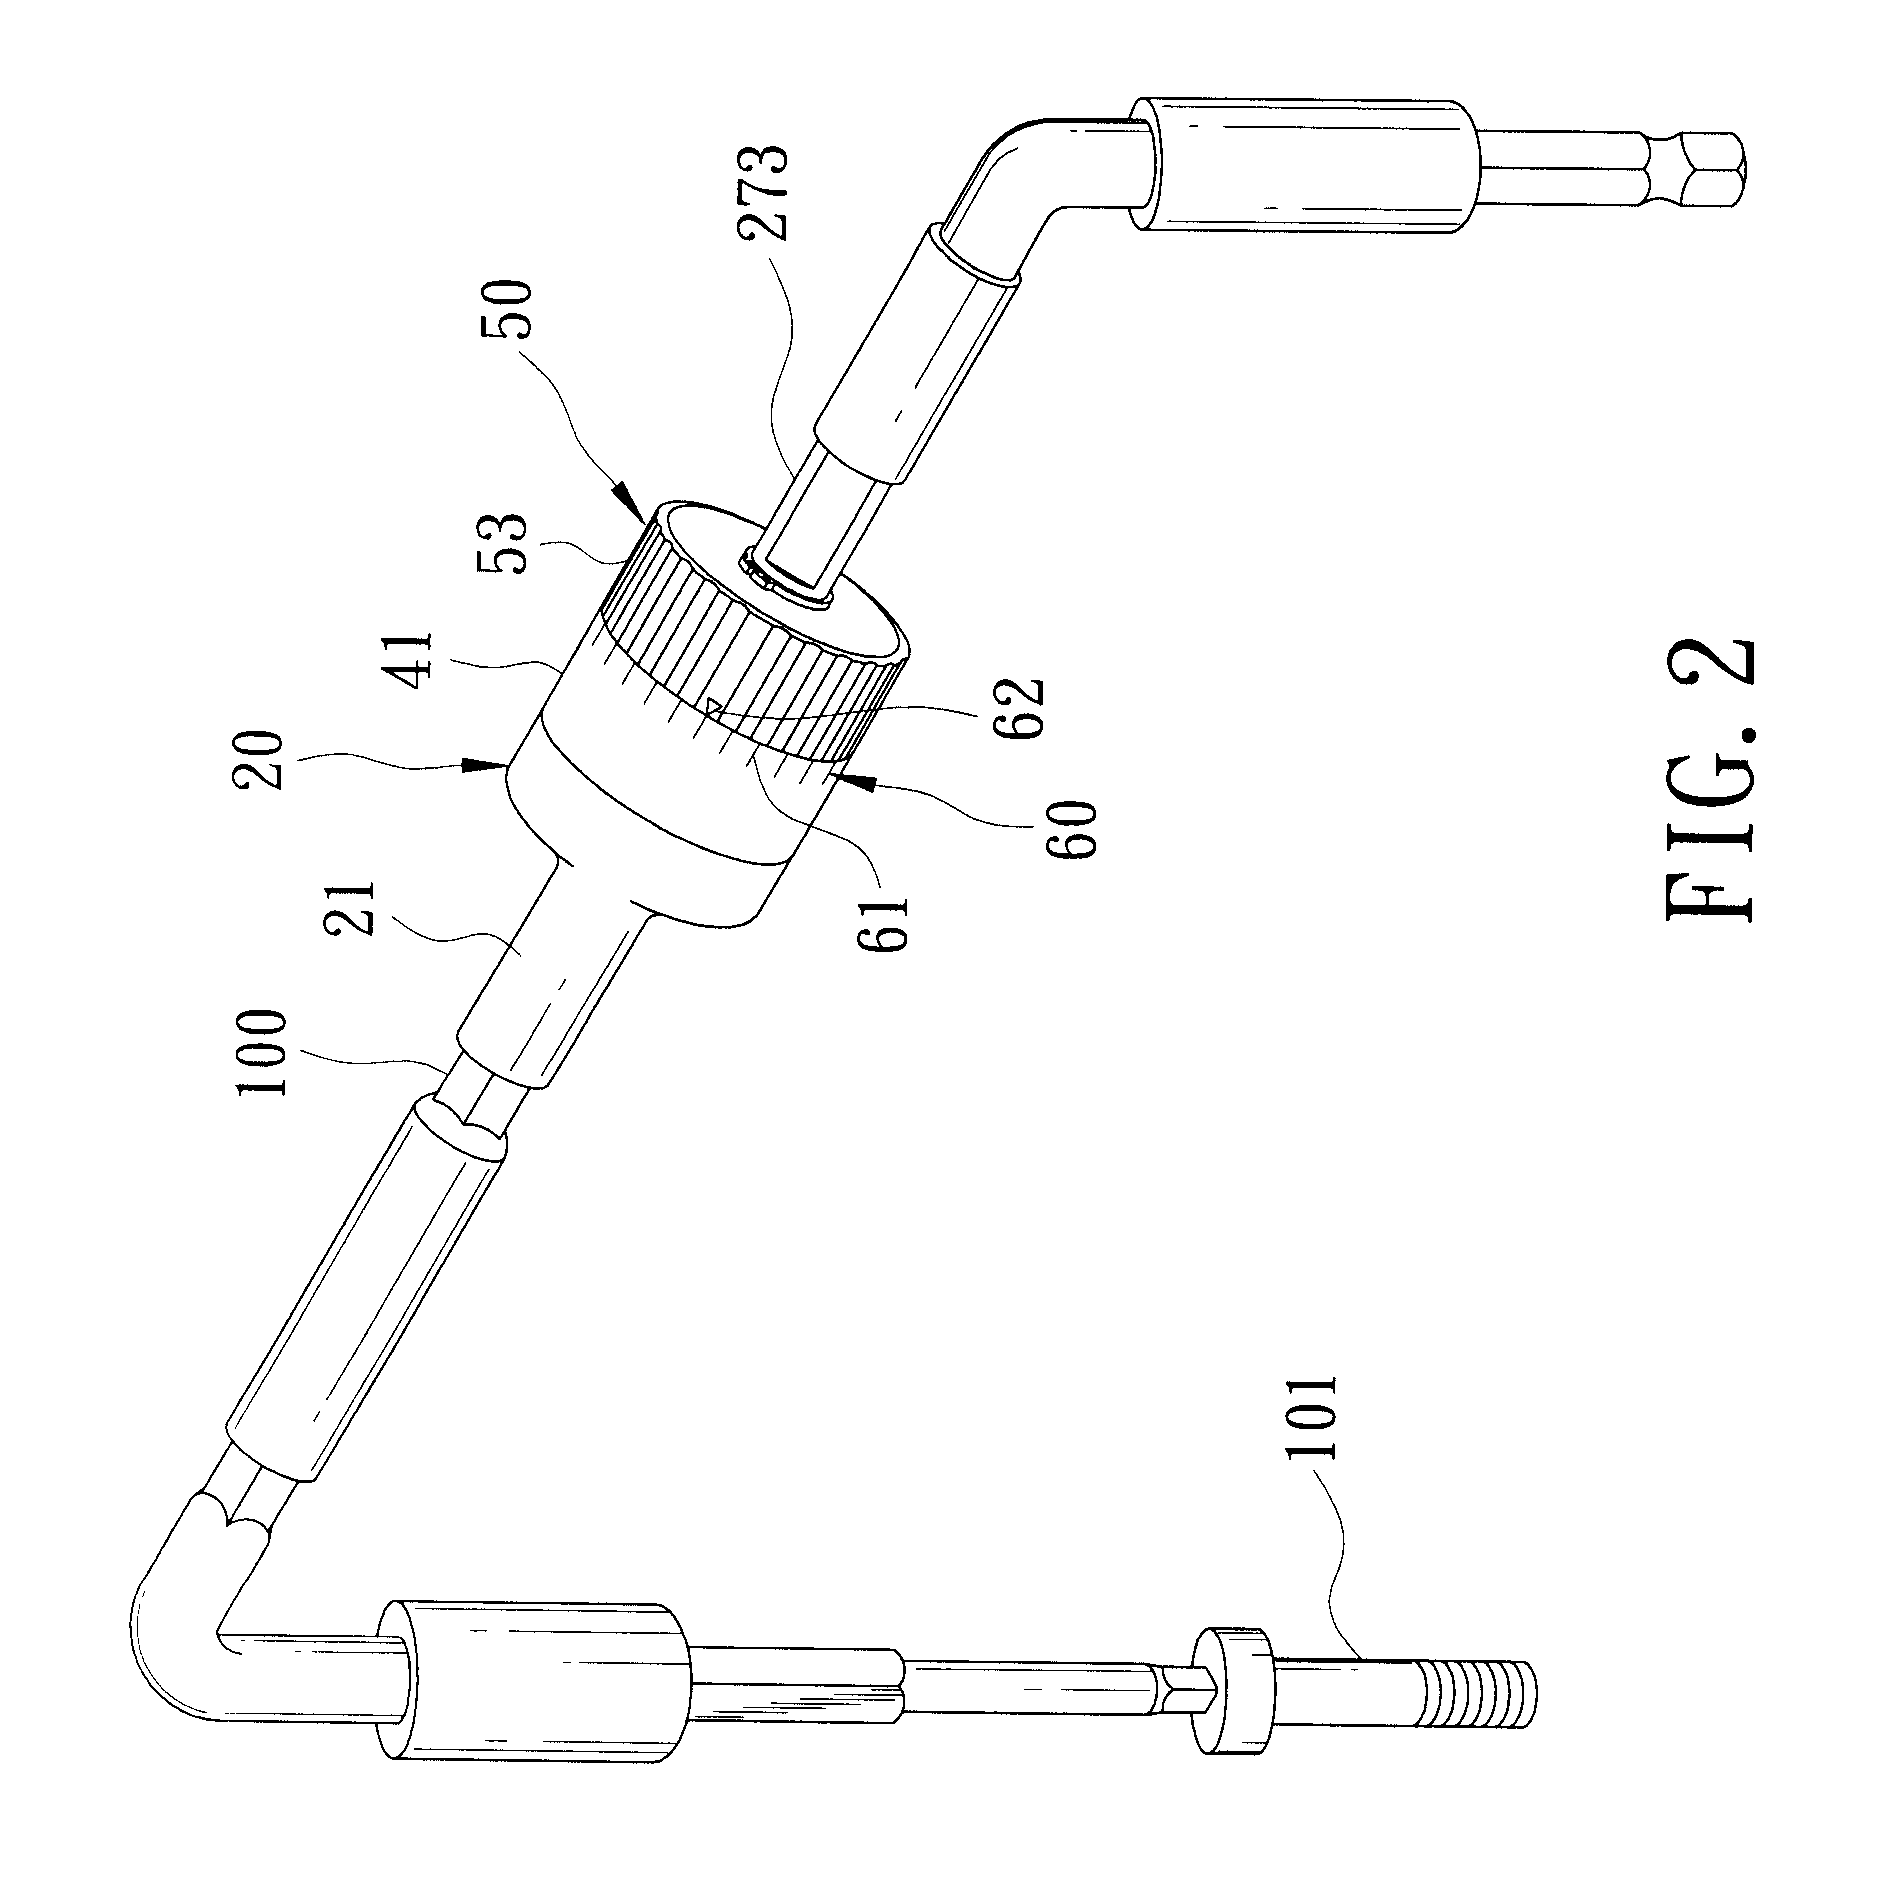 Adjustable torque limiting device for a click-type torque wrench